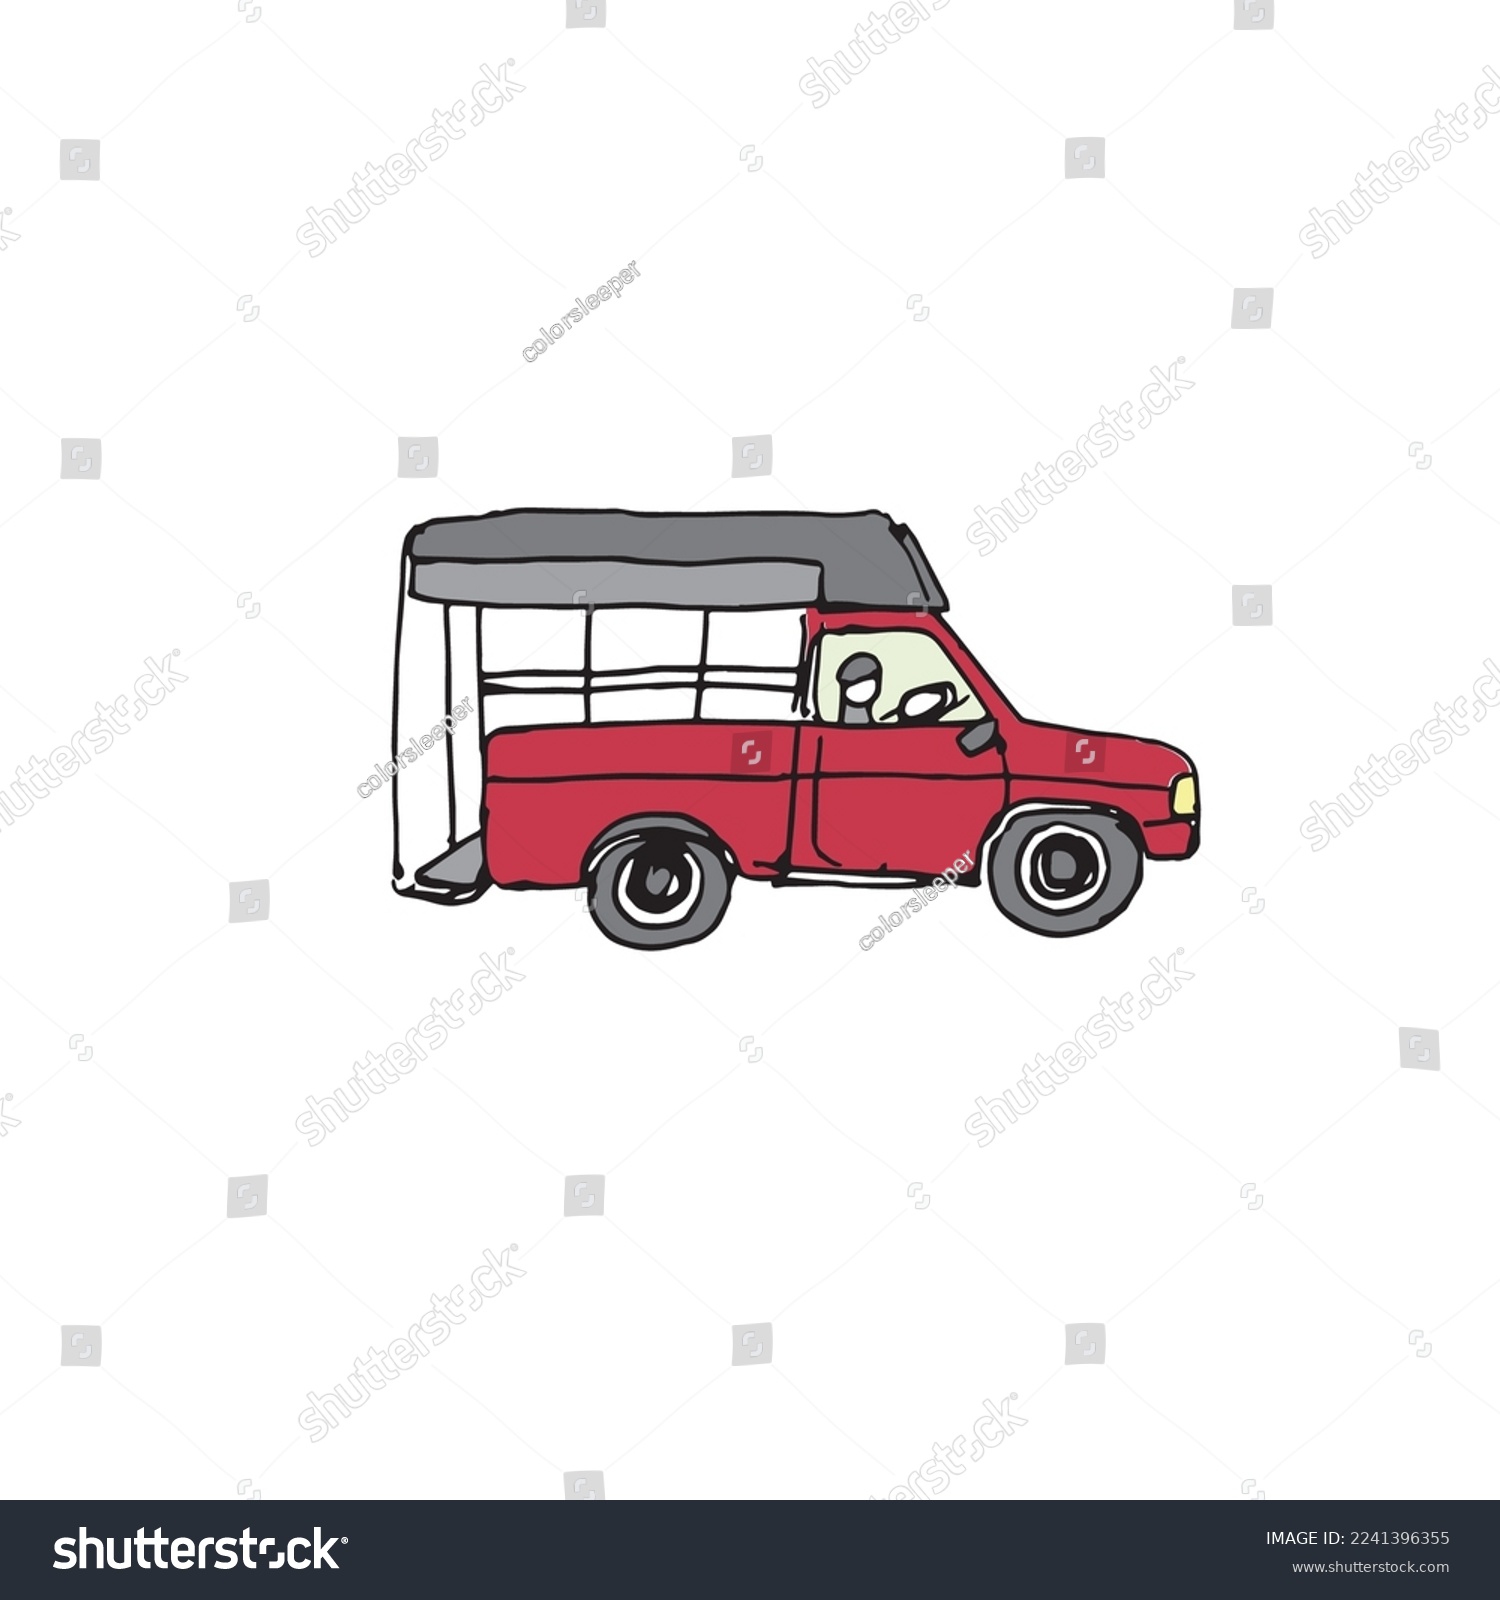 SVG of Single cab pickup truck, local minibus in Thailand, freehand drawn vector on white background svg